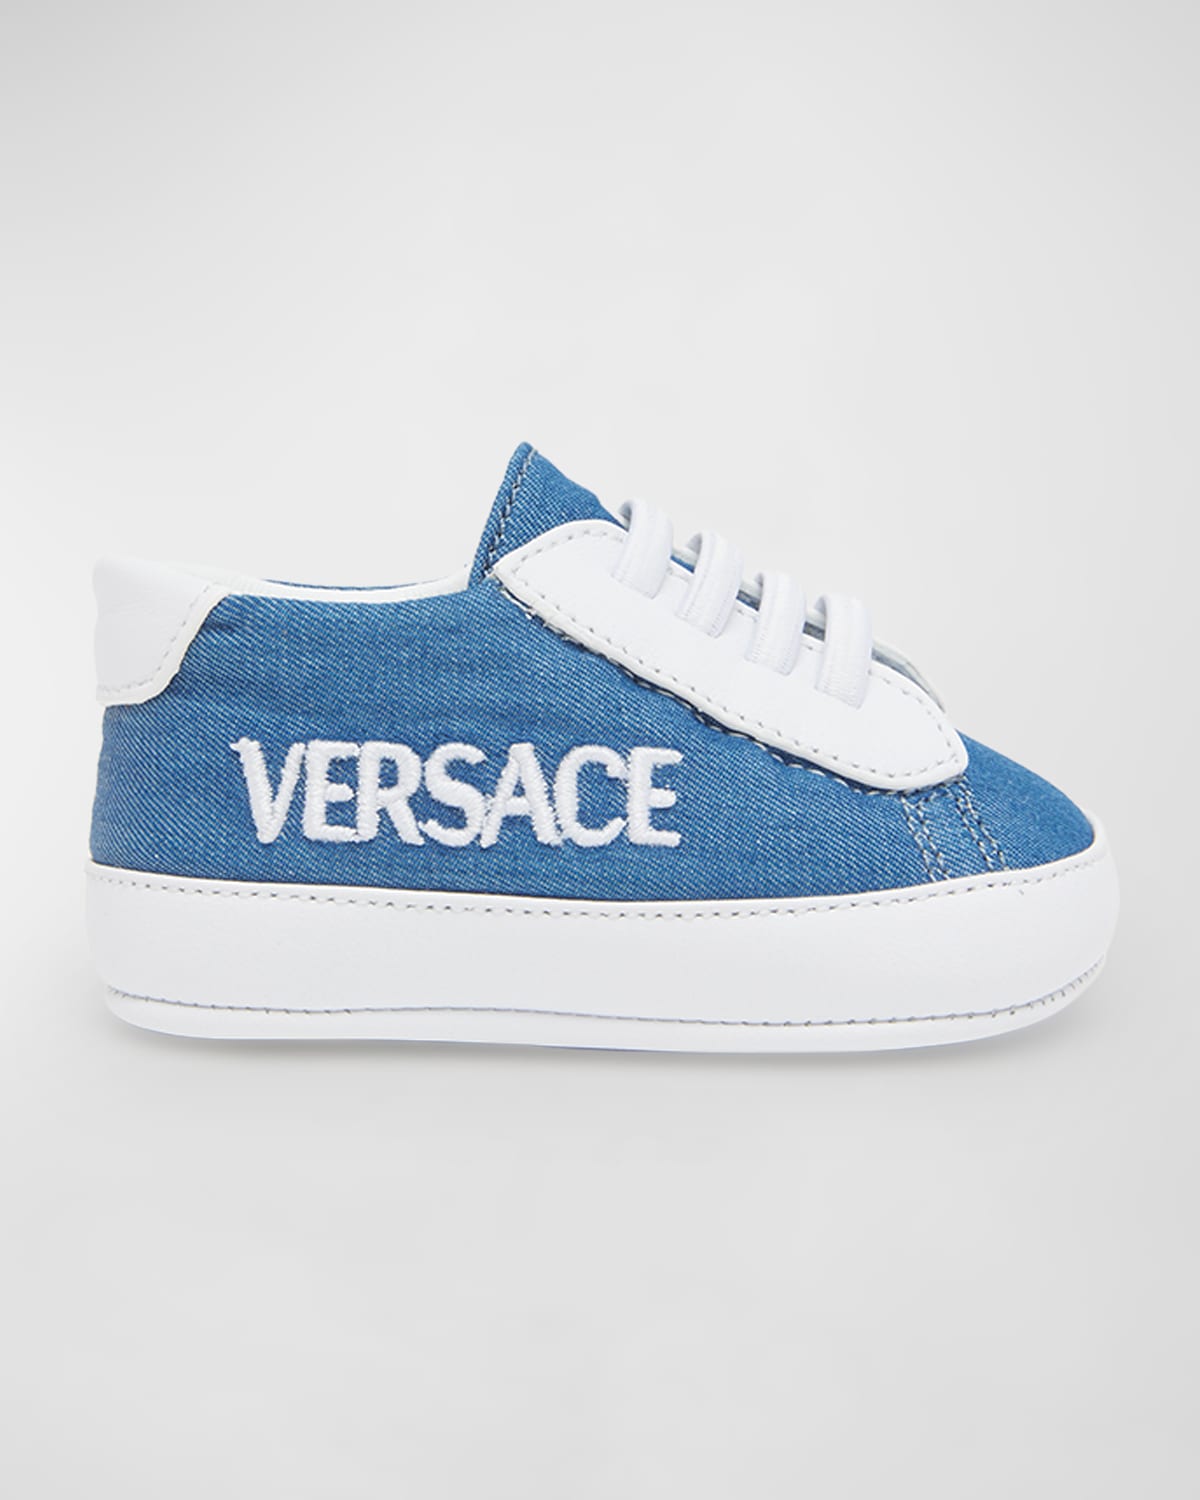 Versace Kids' Boy's Leather And Fabric Logo Sneakers, Baby In Denimwhite